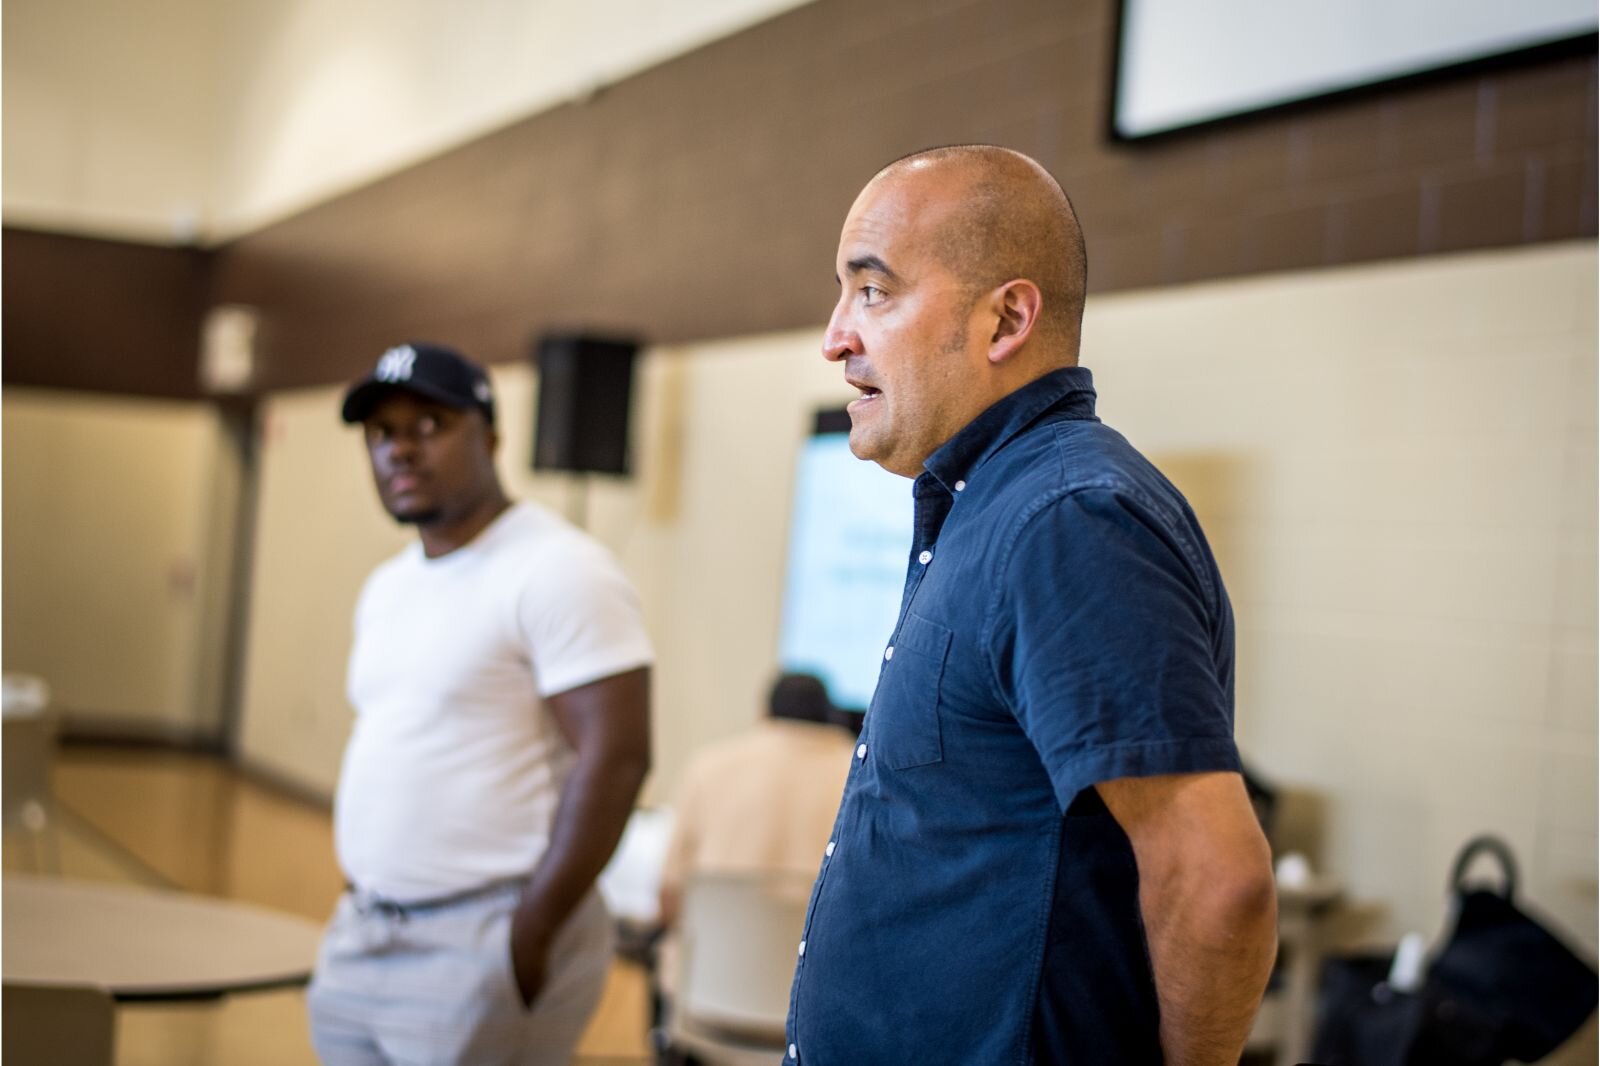 Jason Muniz, of Hollander Development Corp., answers questions about a planned senior housing complex during a July 21, 2022 community input session. He was joined by associate developer Jamauri Bogan, left.